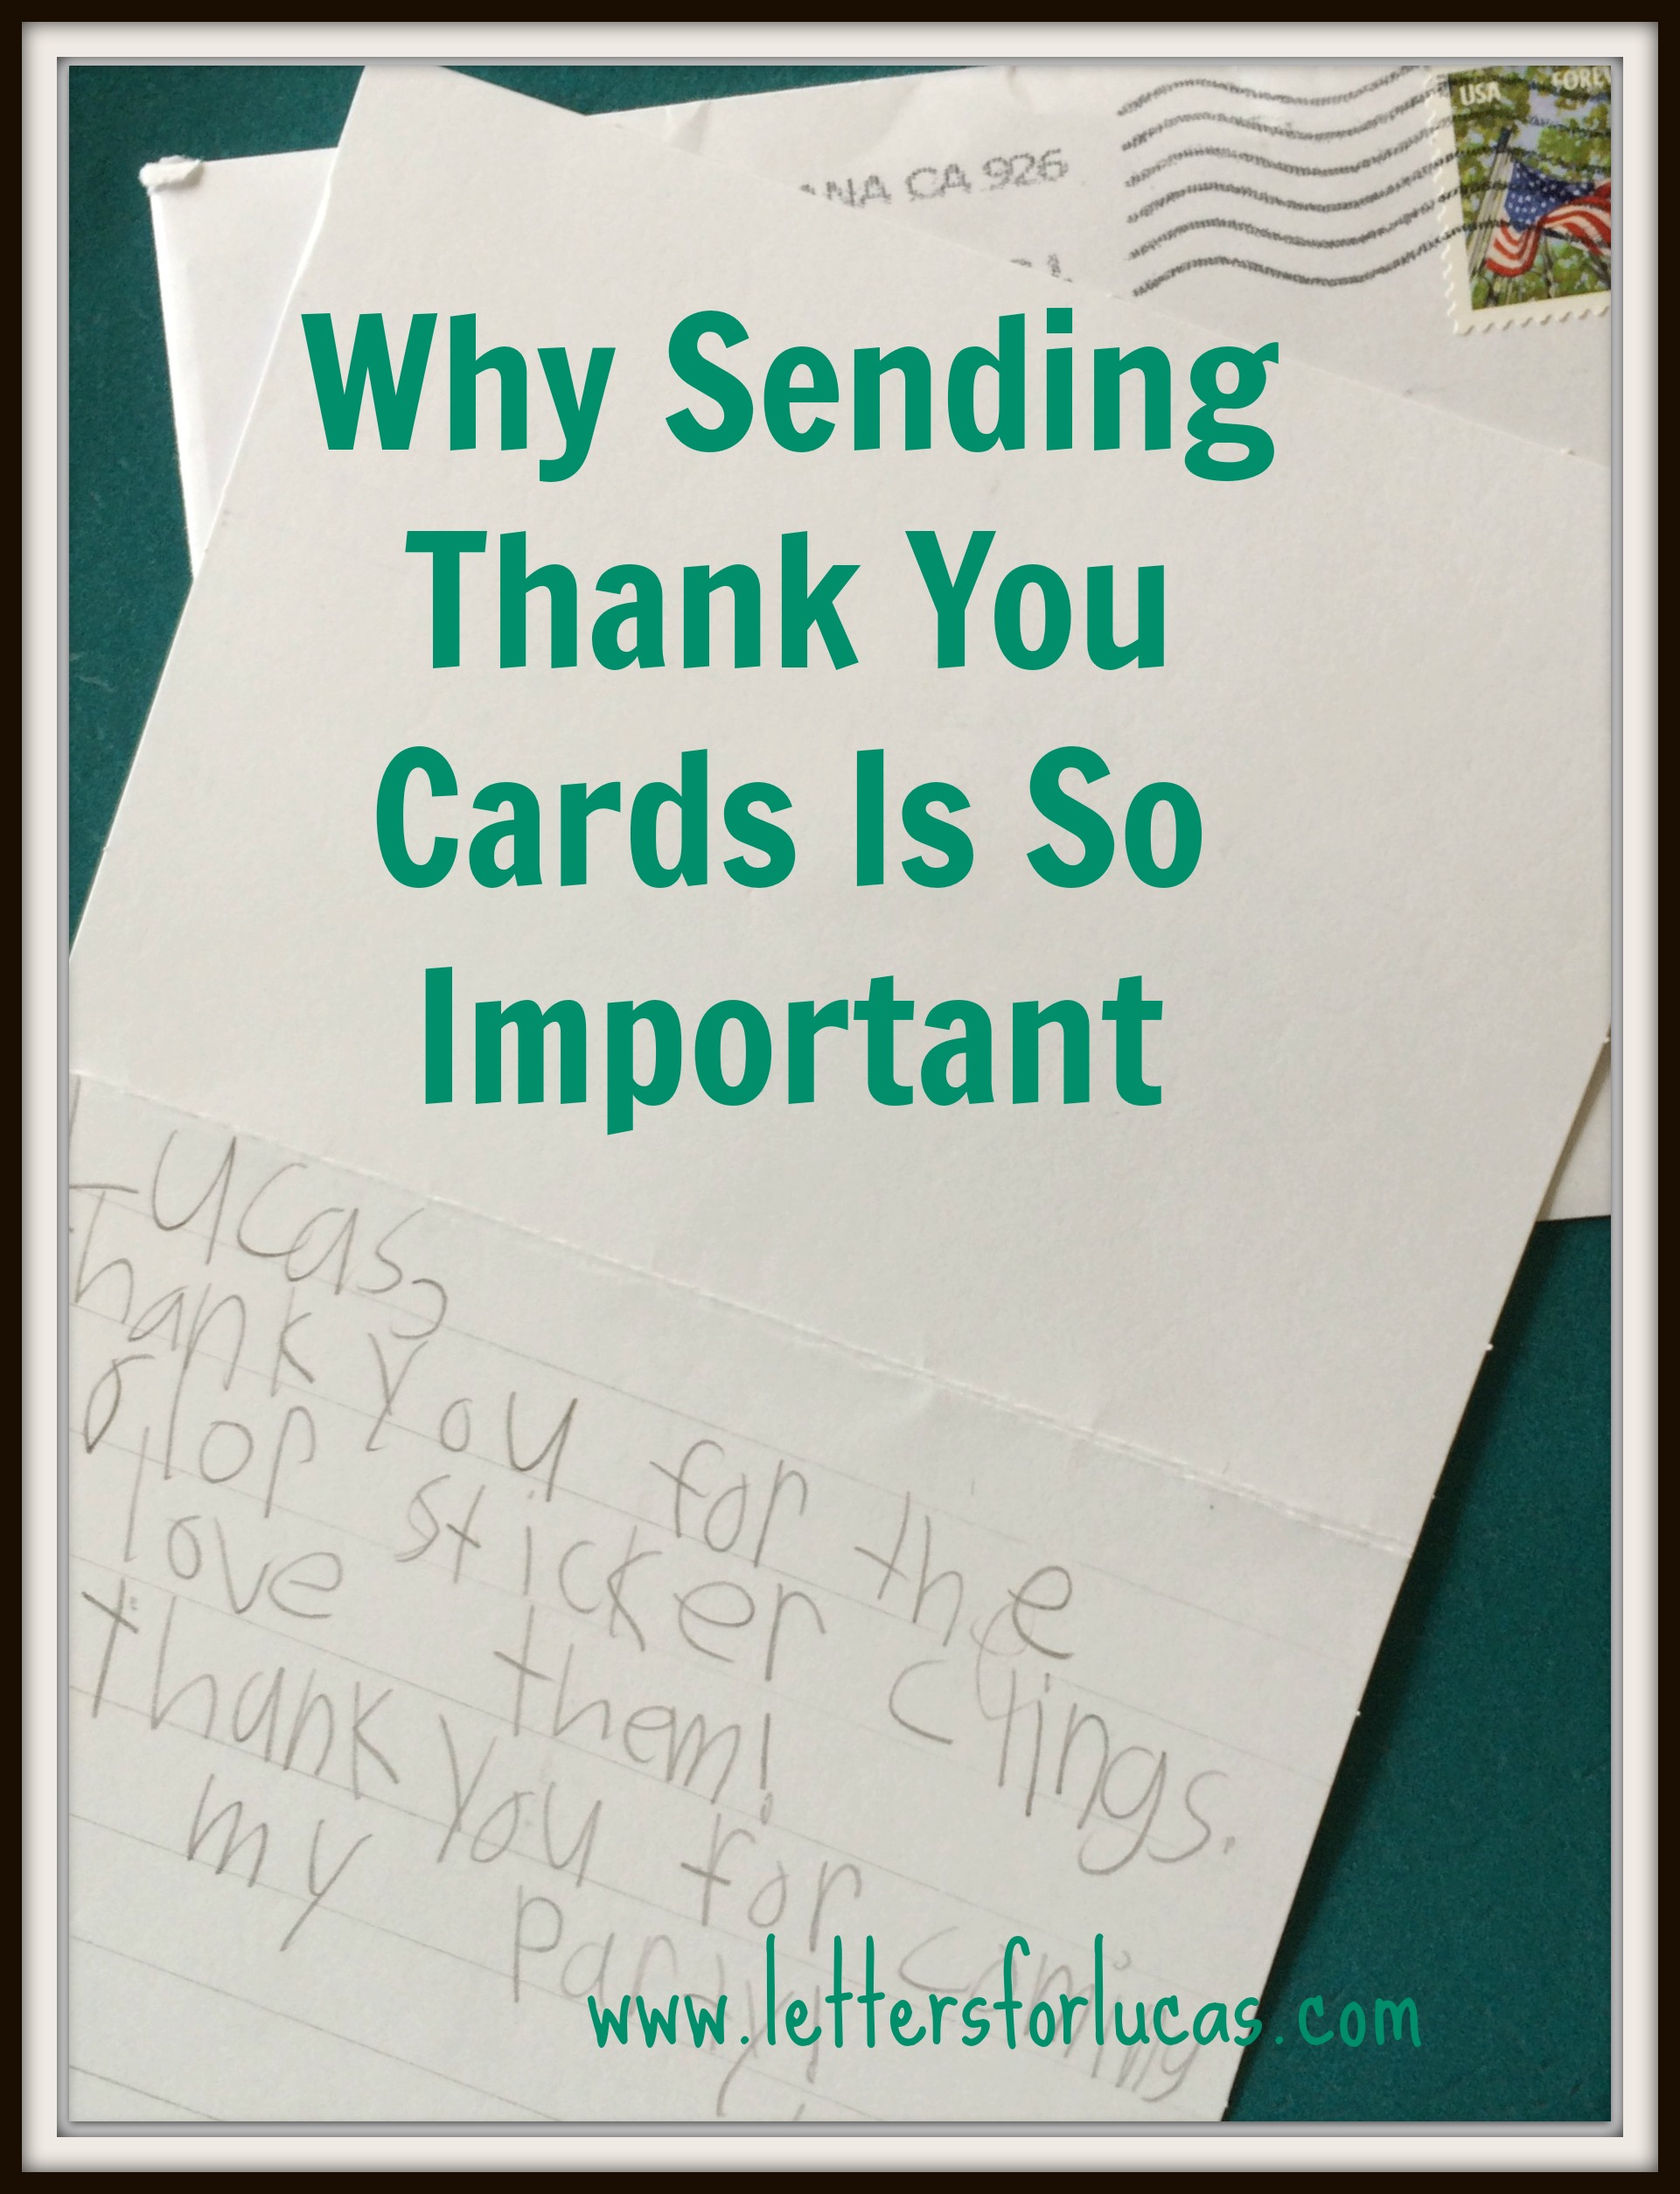 Why Sending Thank You Cards Is So Important